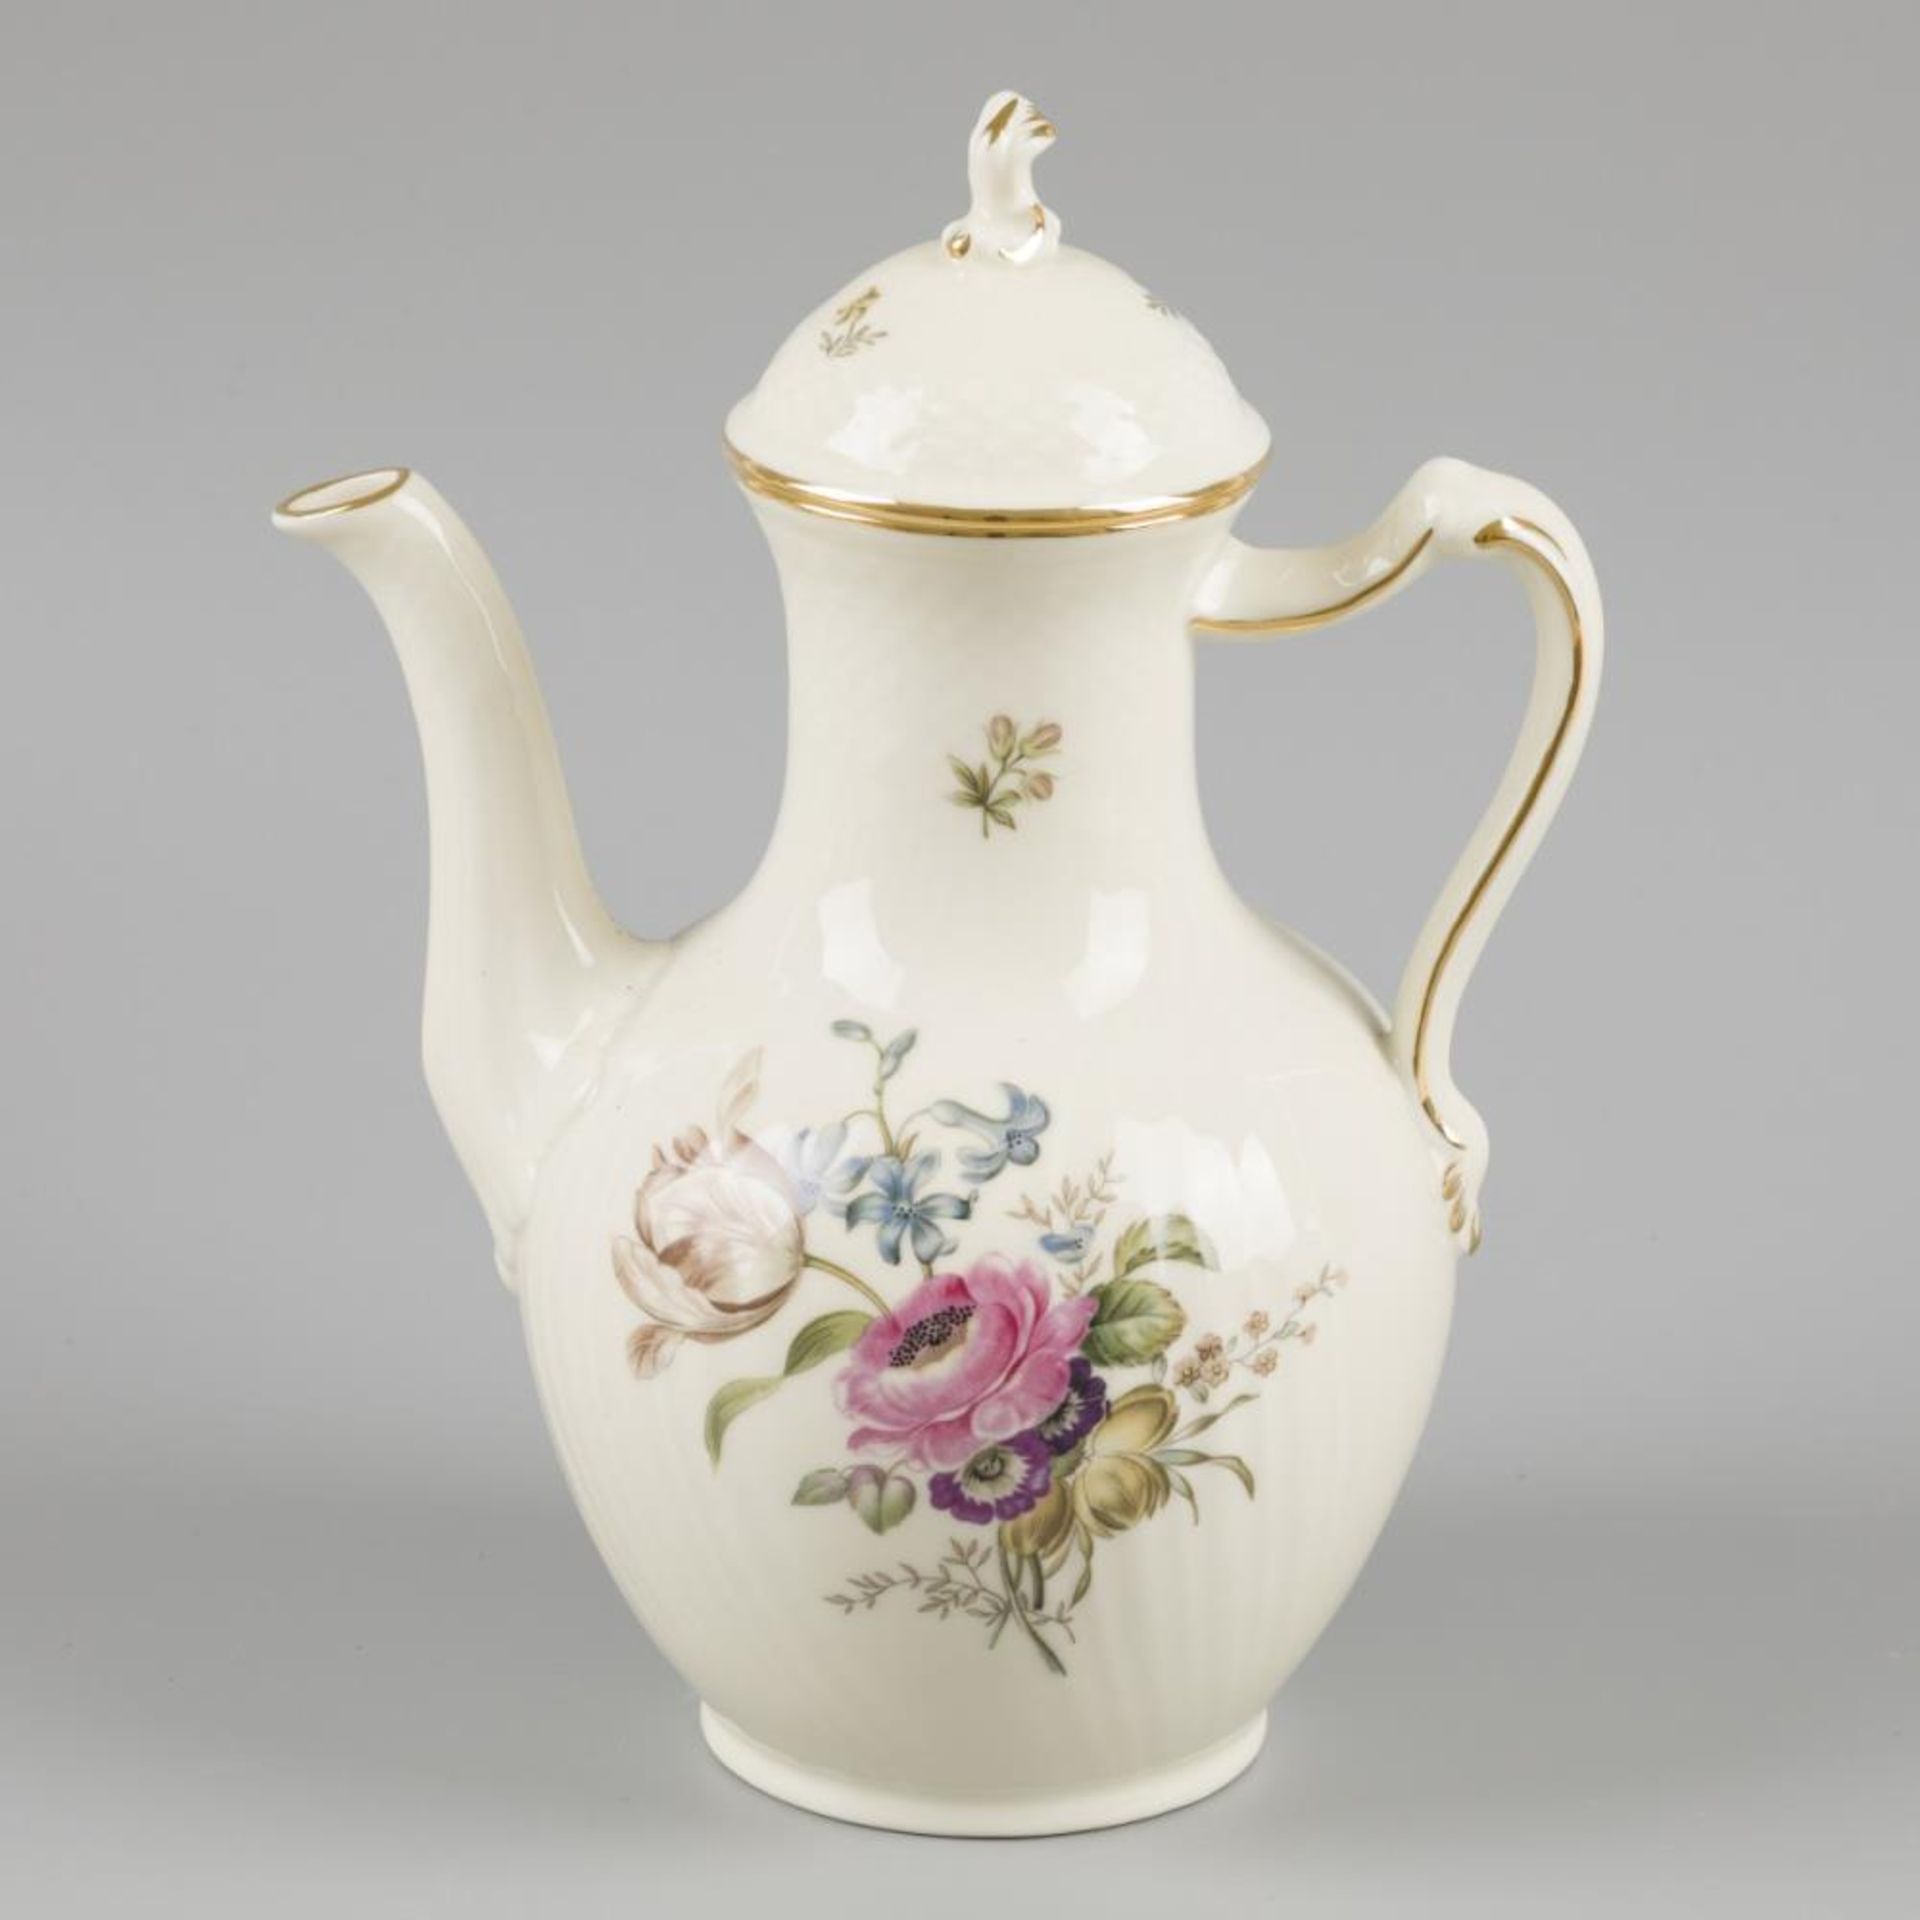 A porcelain coffee pot decorated with flowers, marked Royal Copenhagen. Denmark, 20th century.